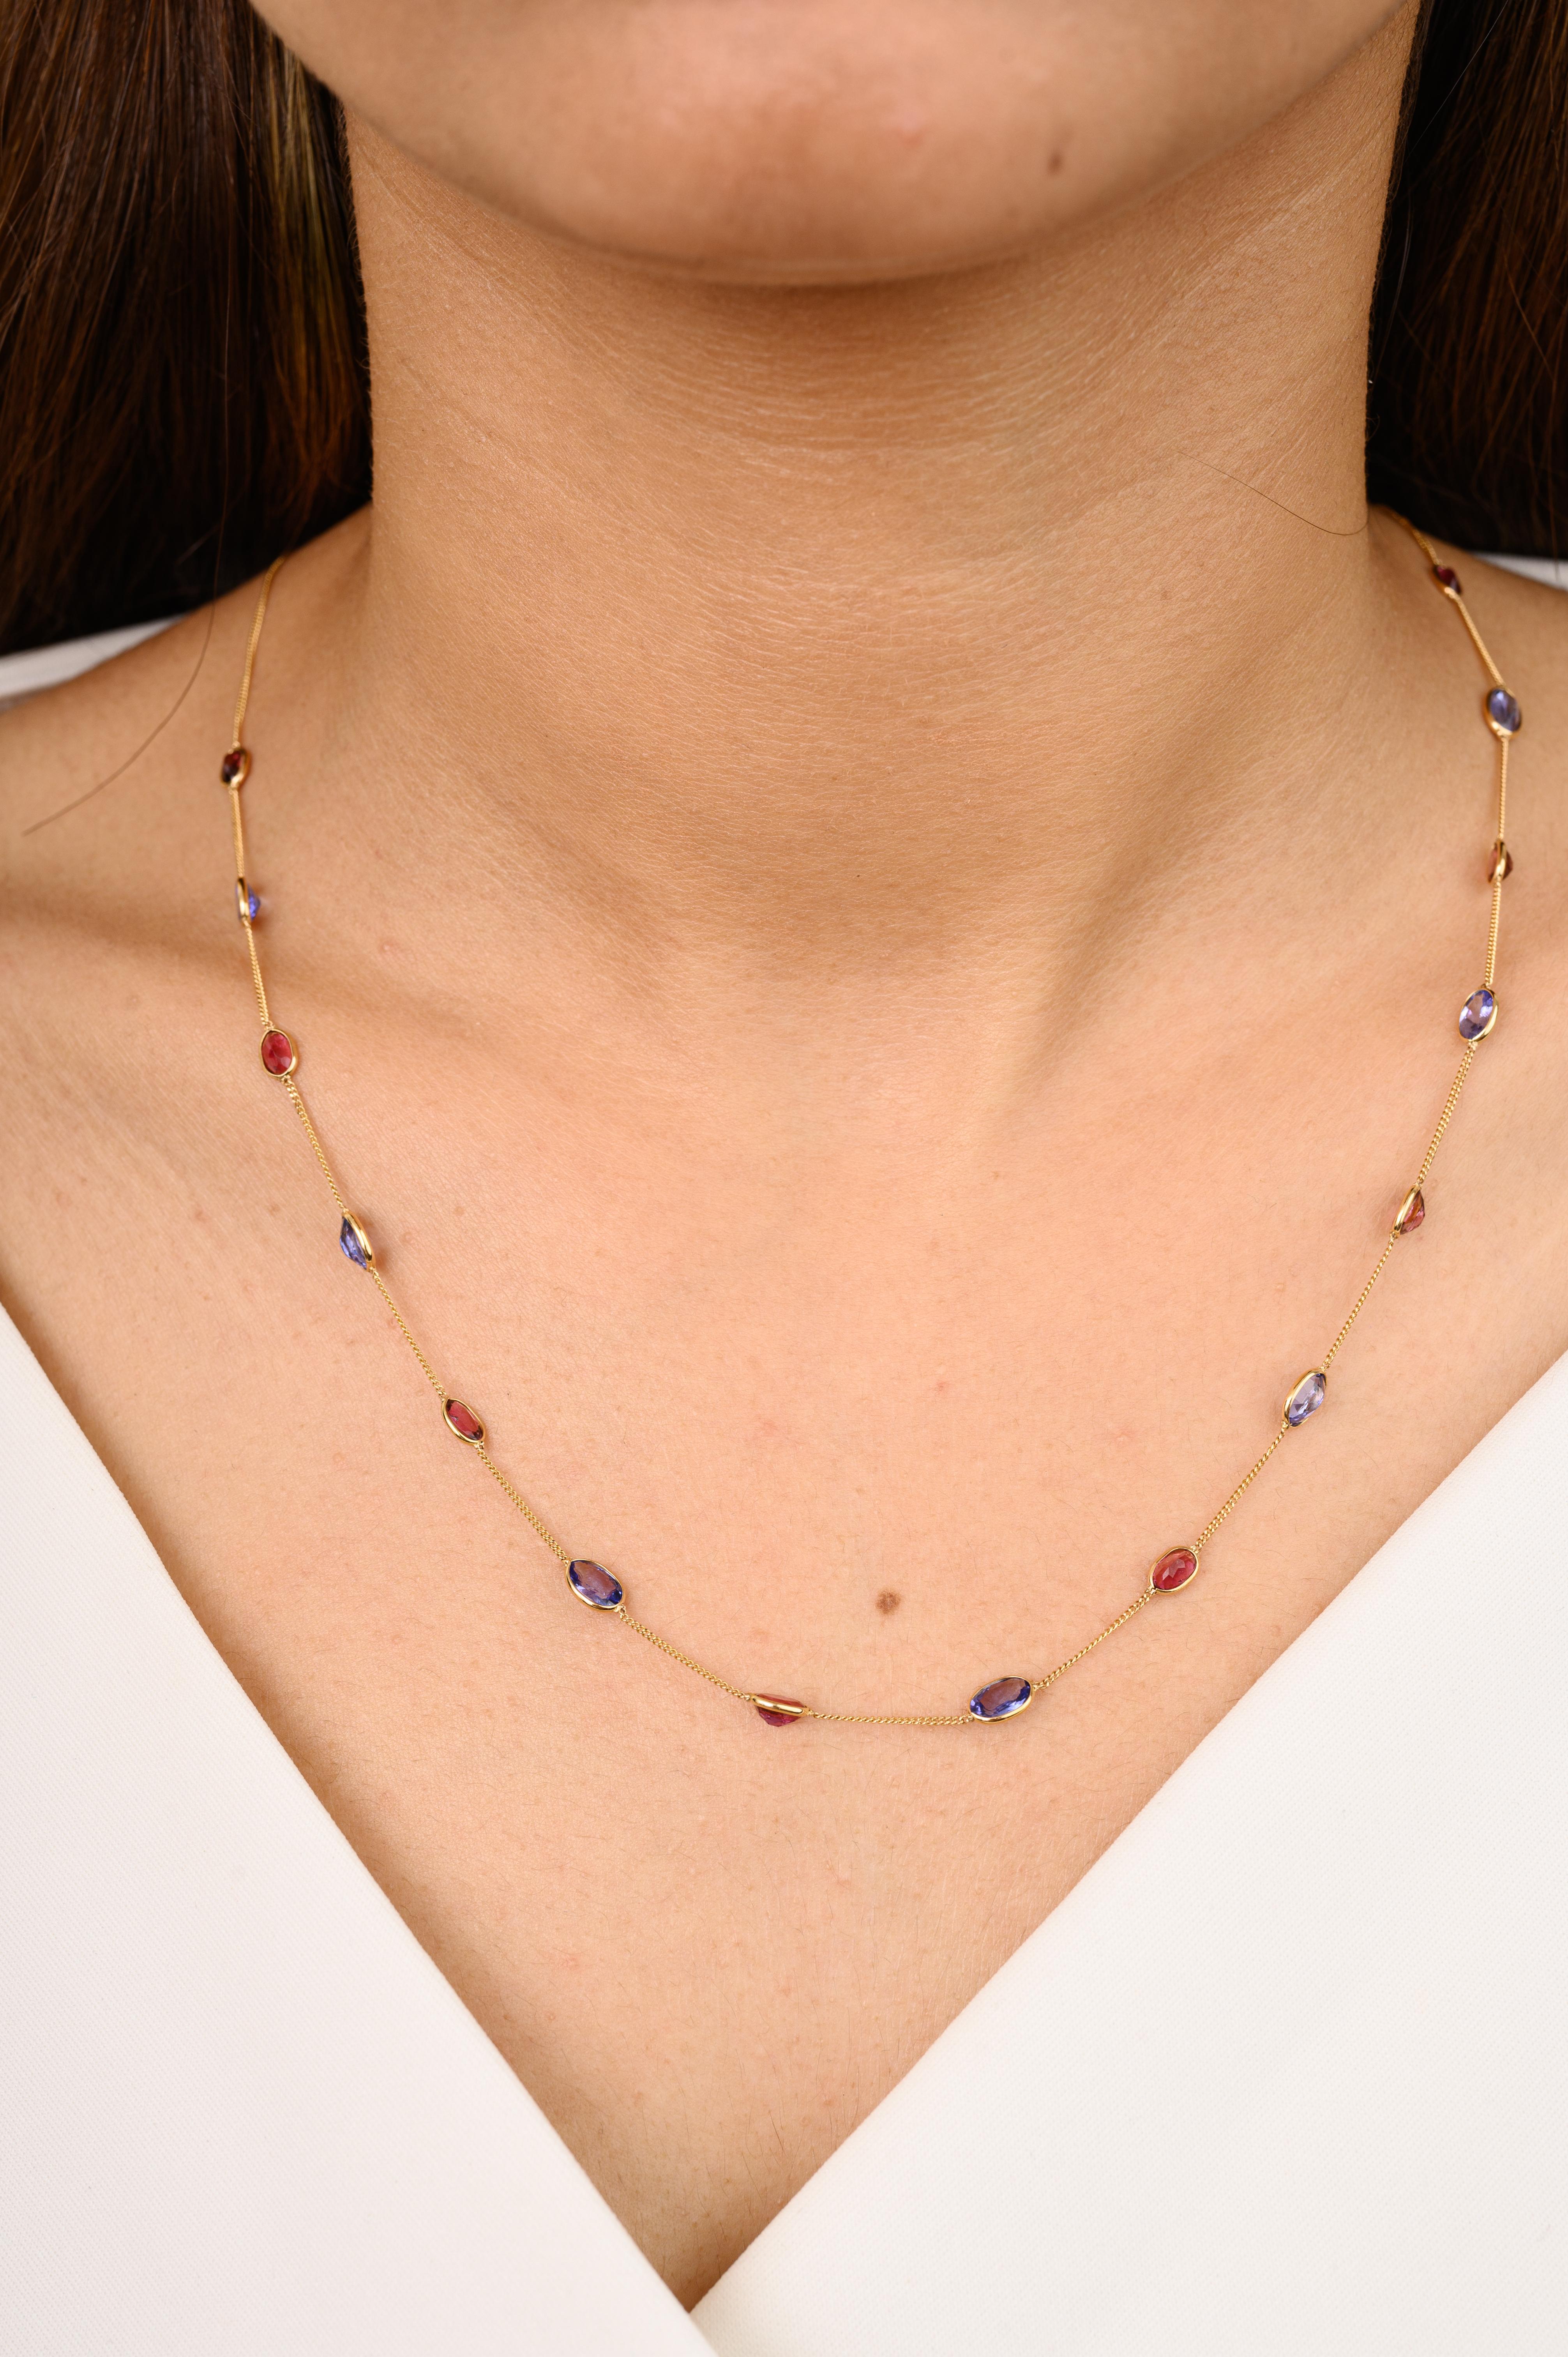 Tanzanite and Tourmaline Station Chain Necklace Gift for Women in 18K Gold studded with oval cut tourmaline and tanzanite. This stunning piece of jewelry instantly elevates a casual look or dressy outfit. 
Tanzanite brings energy, calmness and